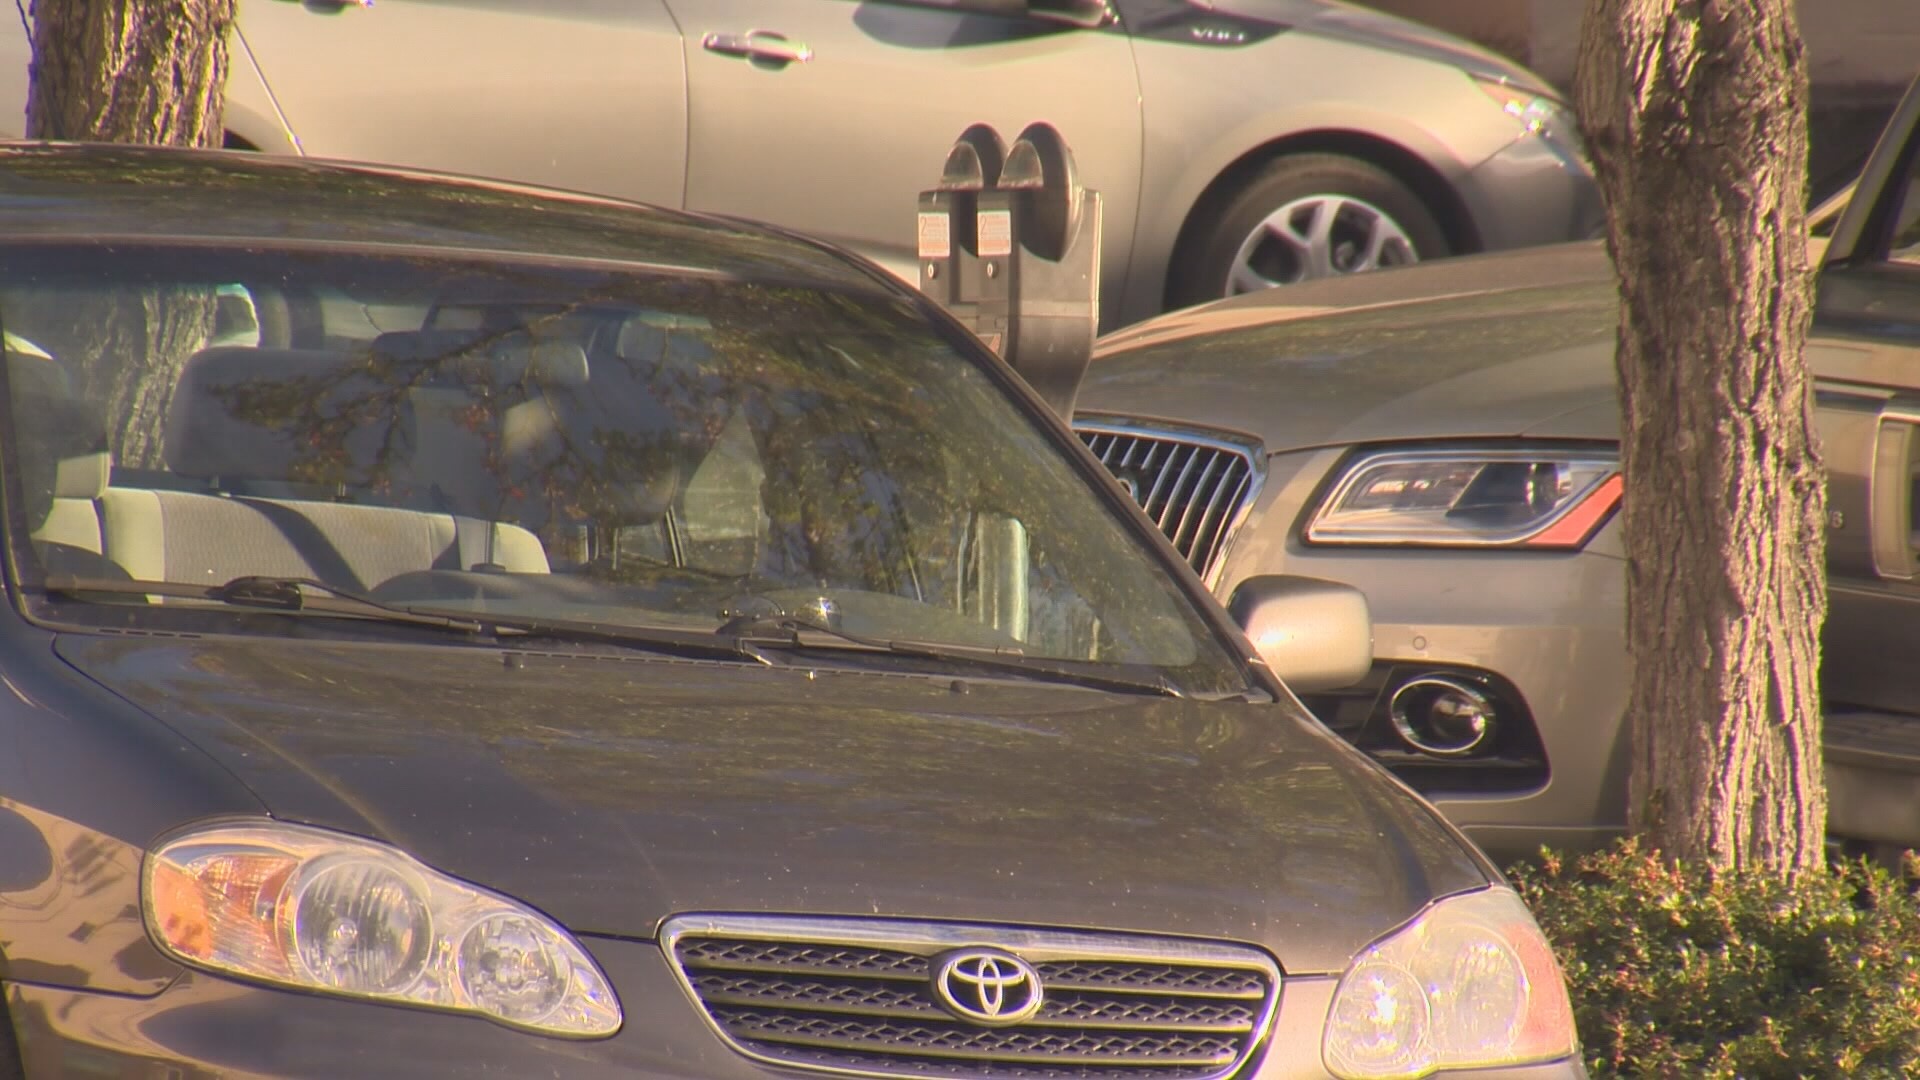 More than 400 cars have been stolen in Vancouver this year. Police said jail space is limited and theft is a low level crime, so thieves may be booked and released.